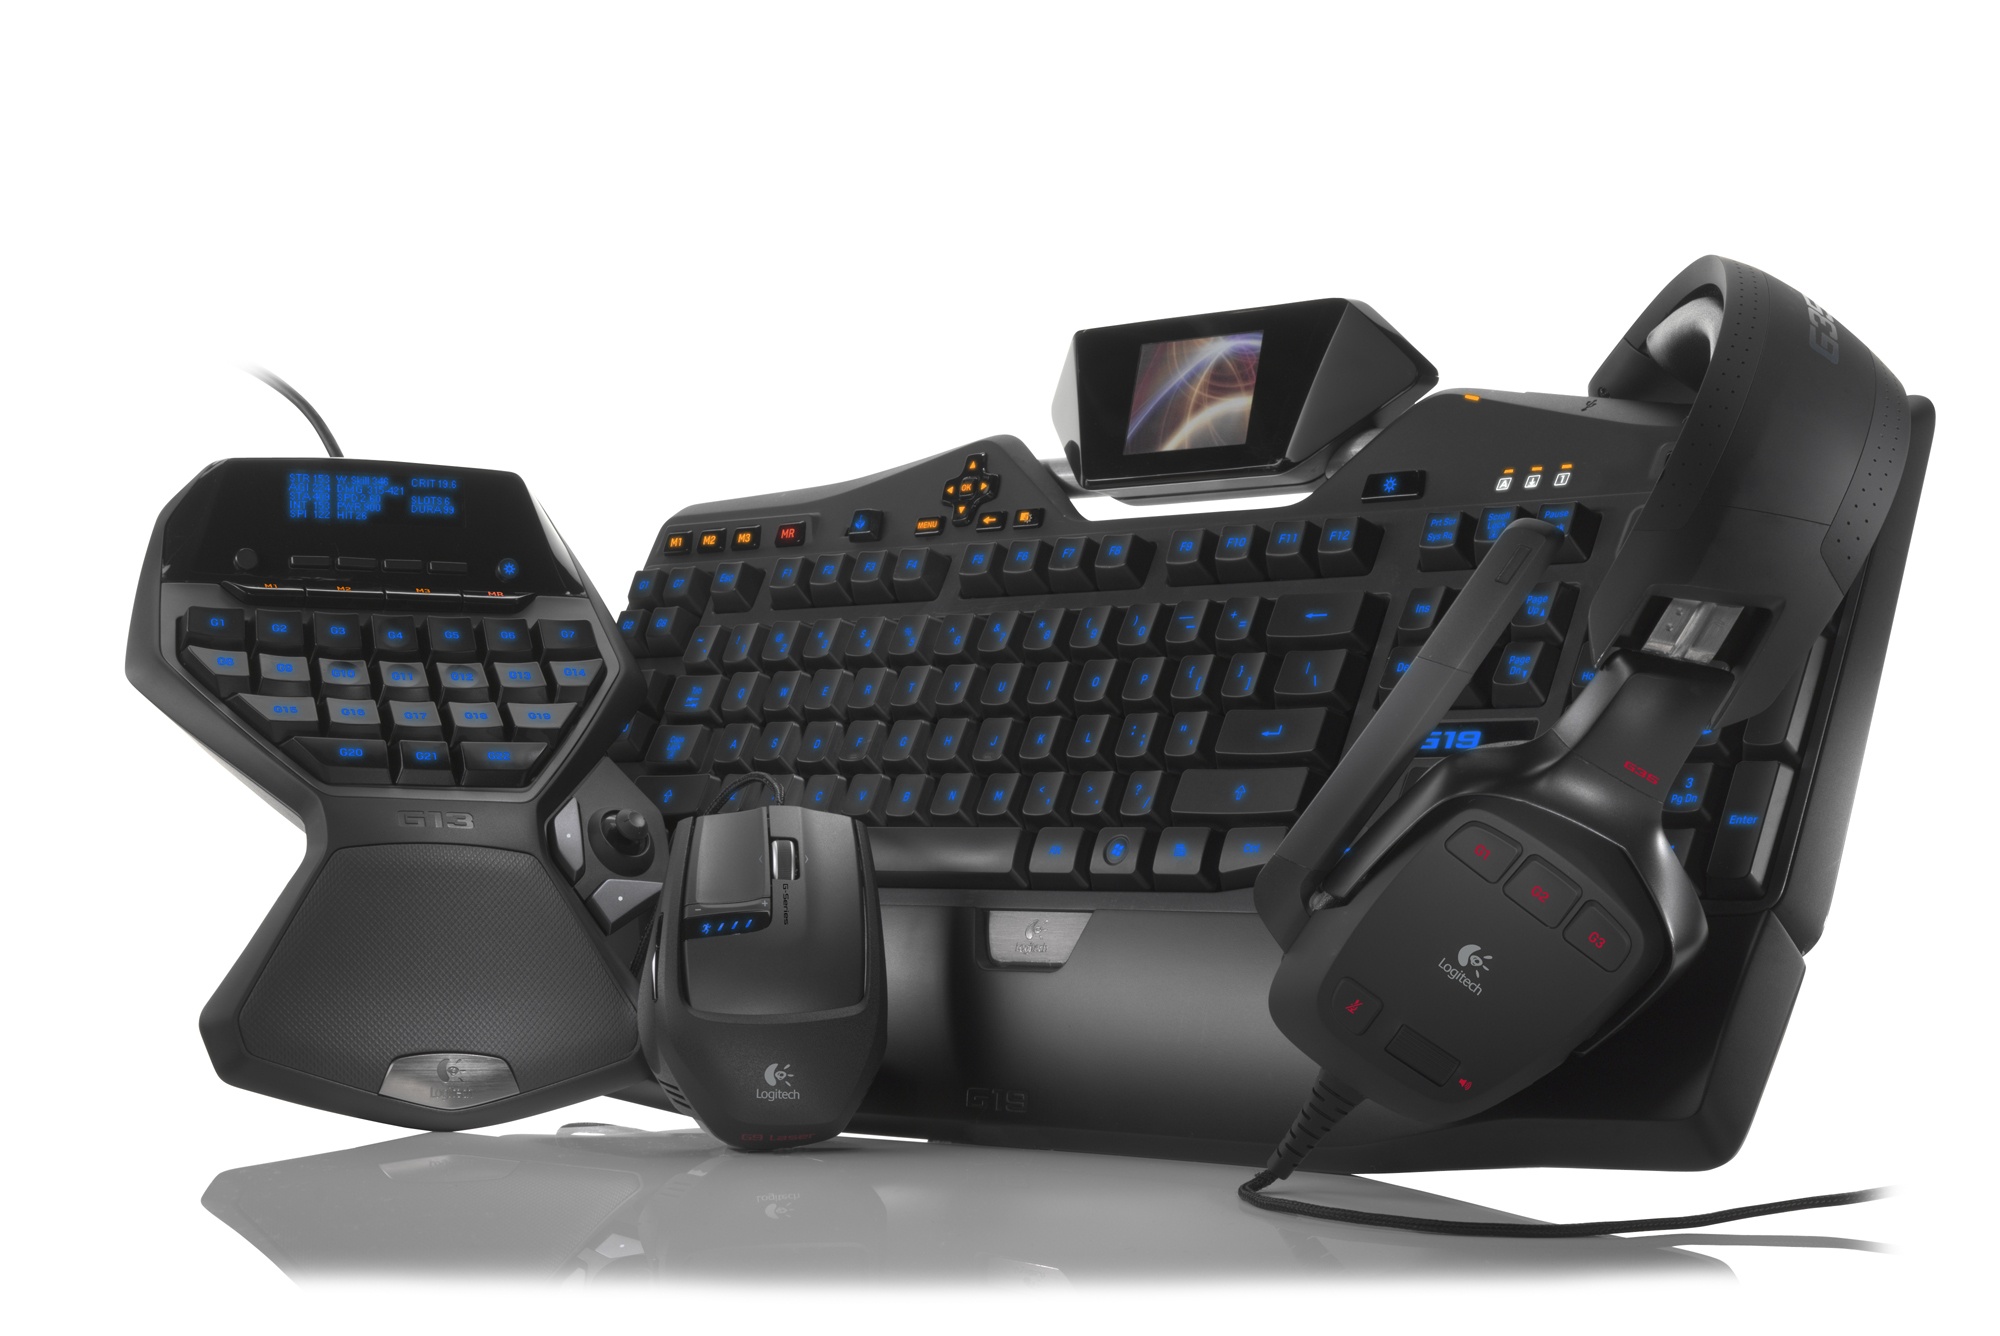 New Logitech Gseries Peripherals Unveiled TechPowerUp